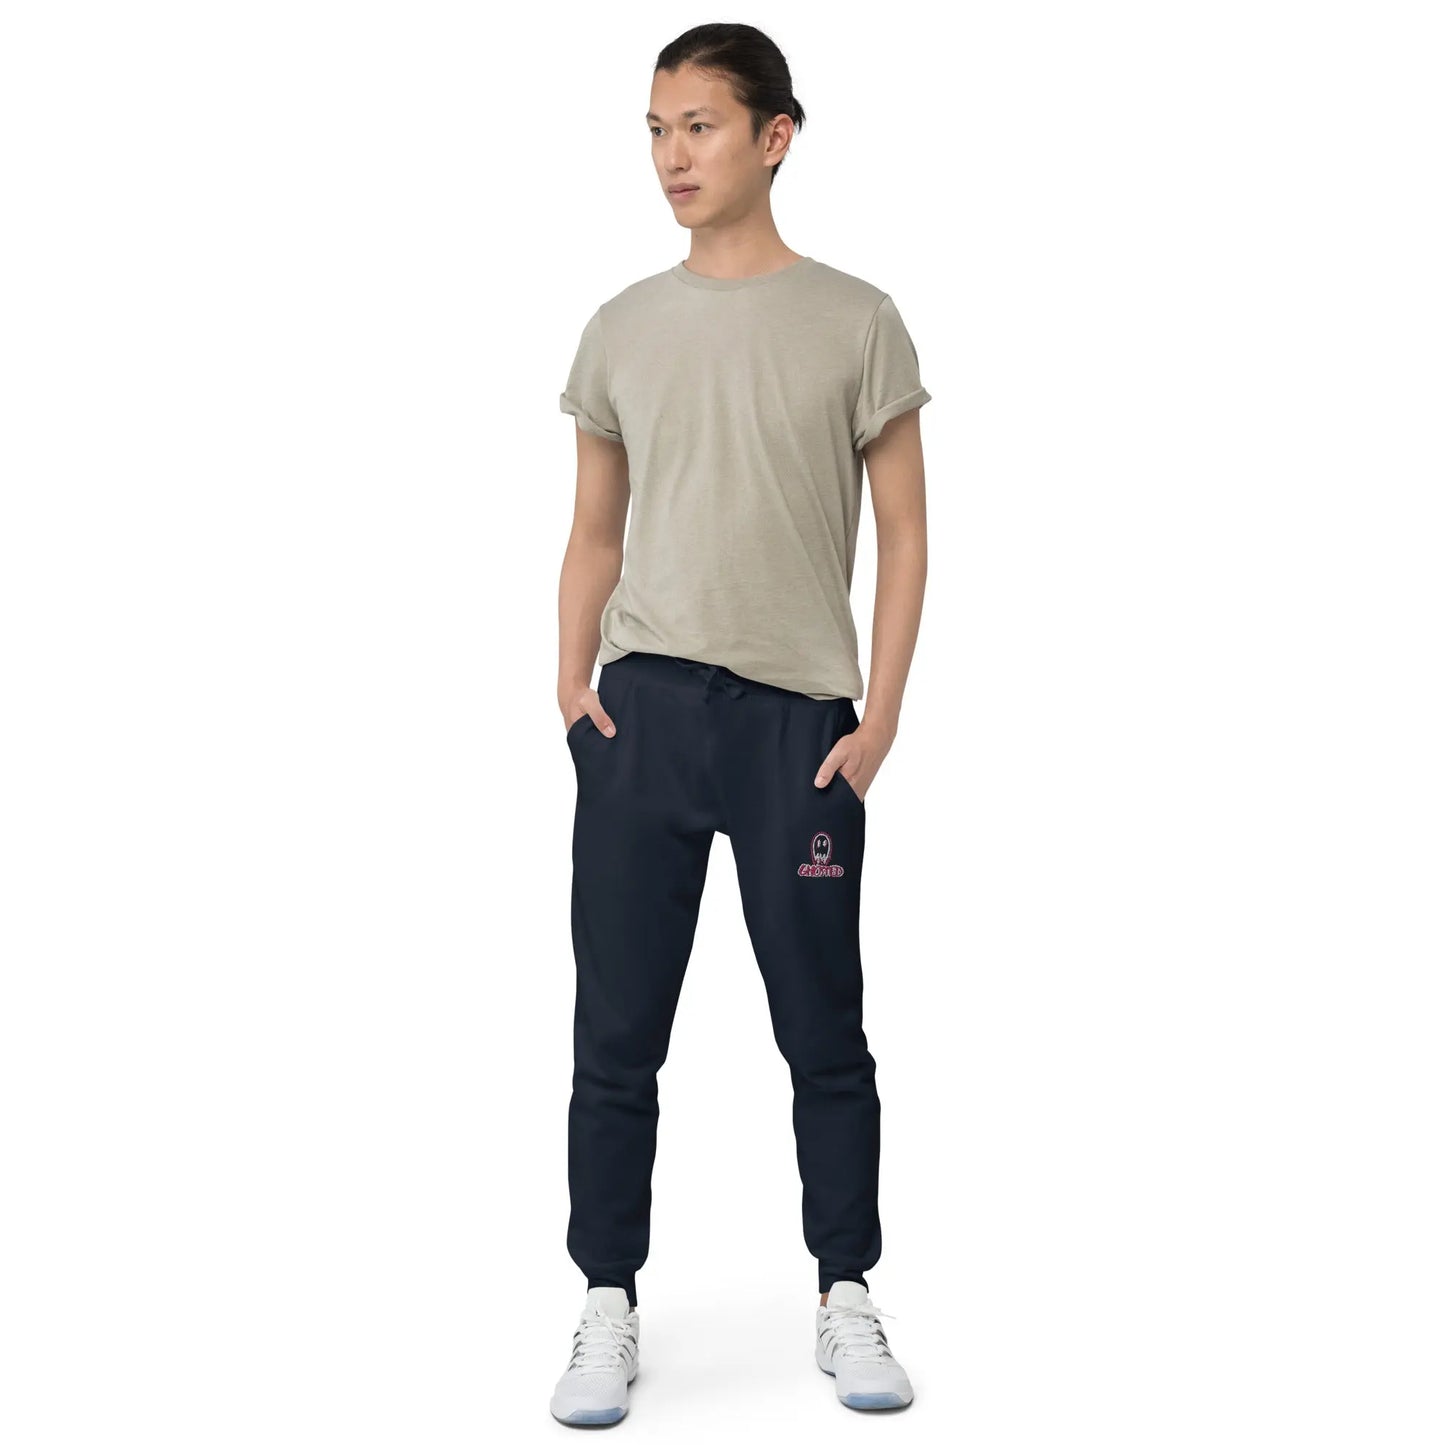 Ghosted Sweatpants - Image #5